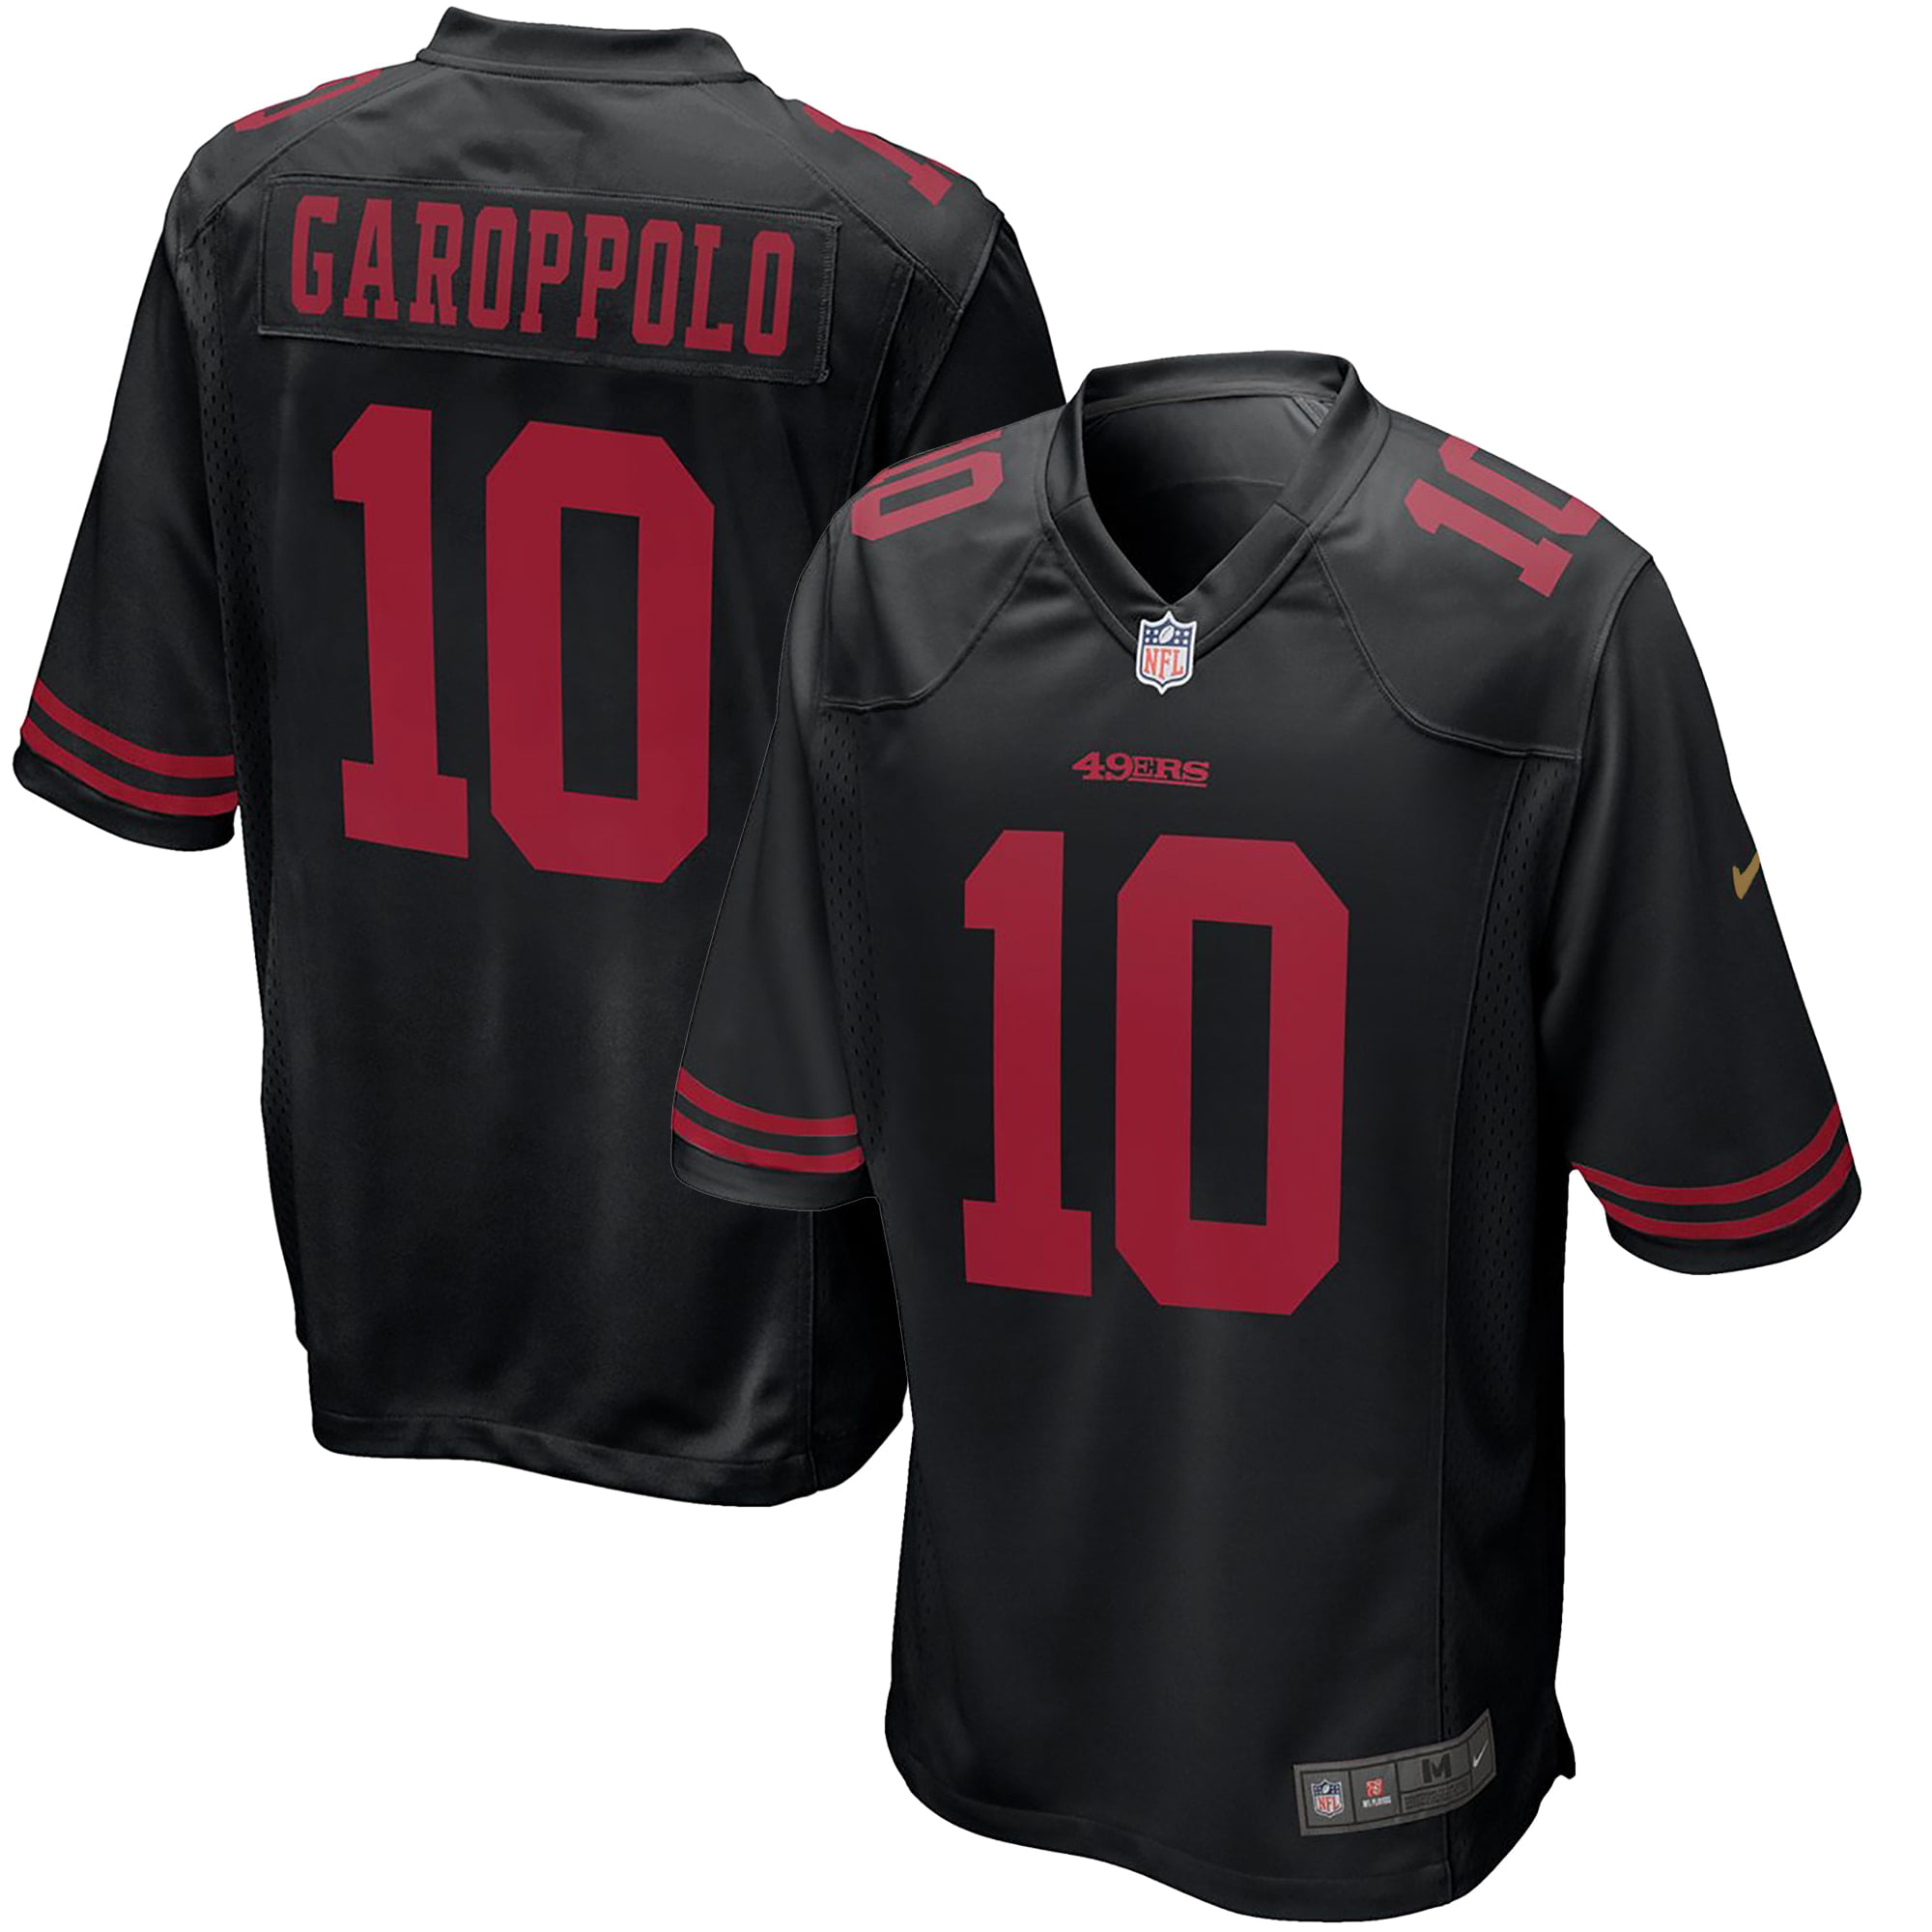 Jimmy Garoppolo San Francisco 49ers #10 Youth 8-20 Home Alternate Player Jersey